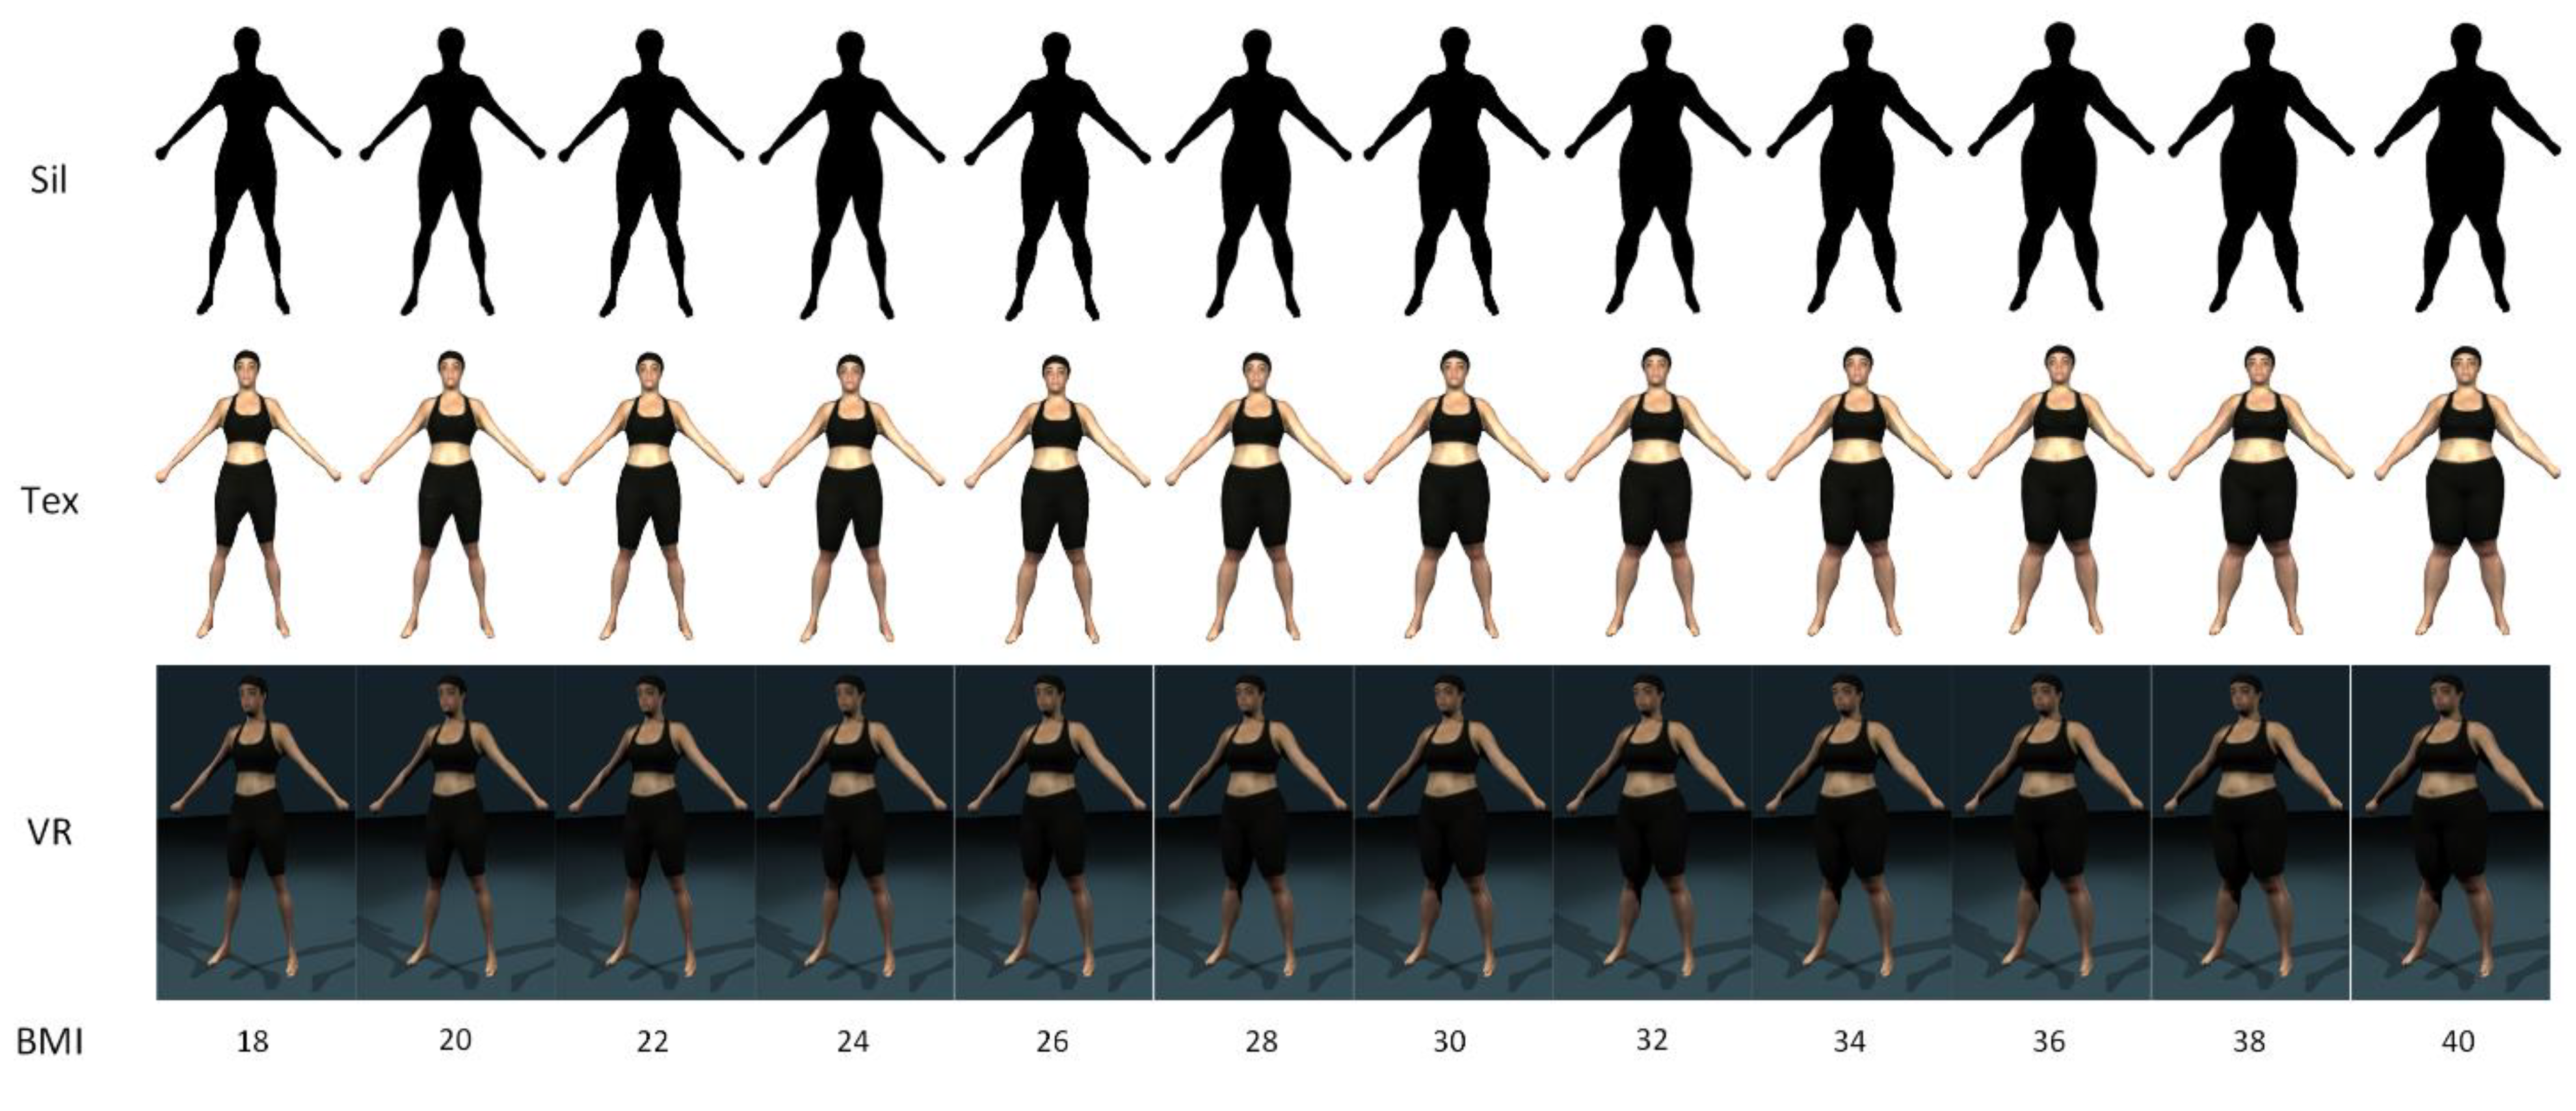 Ejihpe Free Full Text The Development Of A Bmi Guided Shape Morphing Technique And The Effects Of An Individualized Figure Rating Scale On Self Perception Of Body Size Html